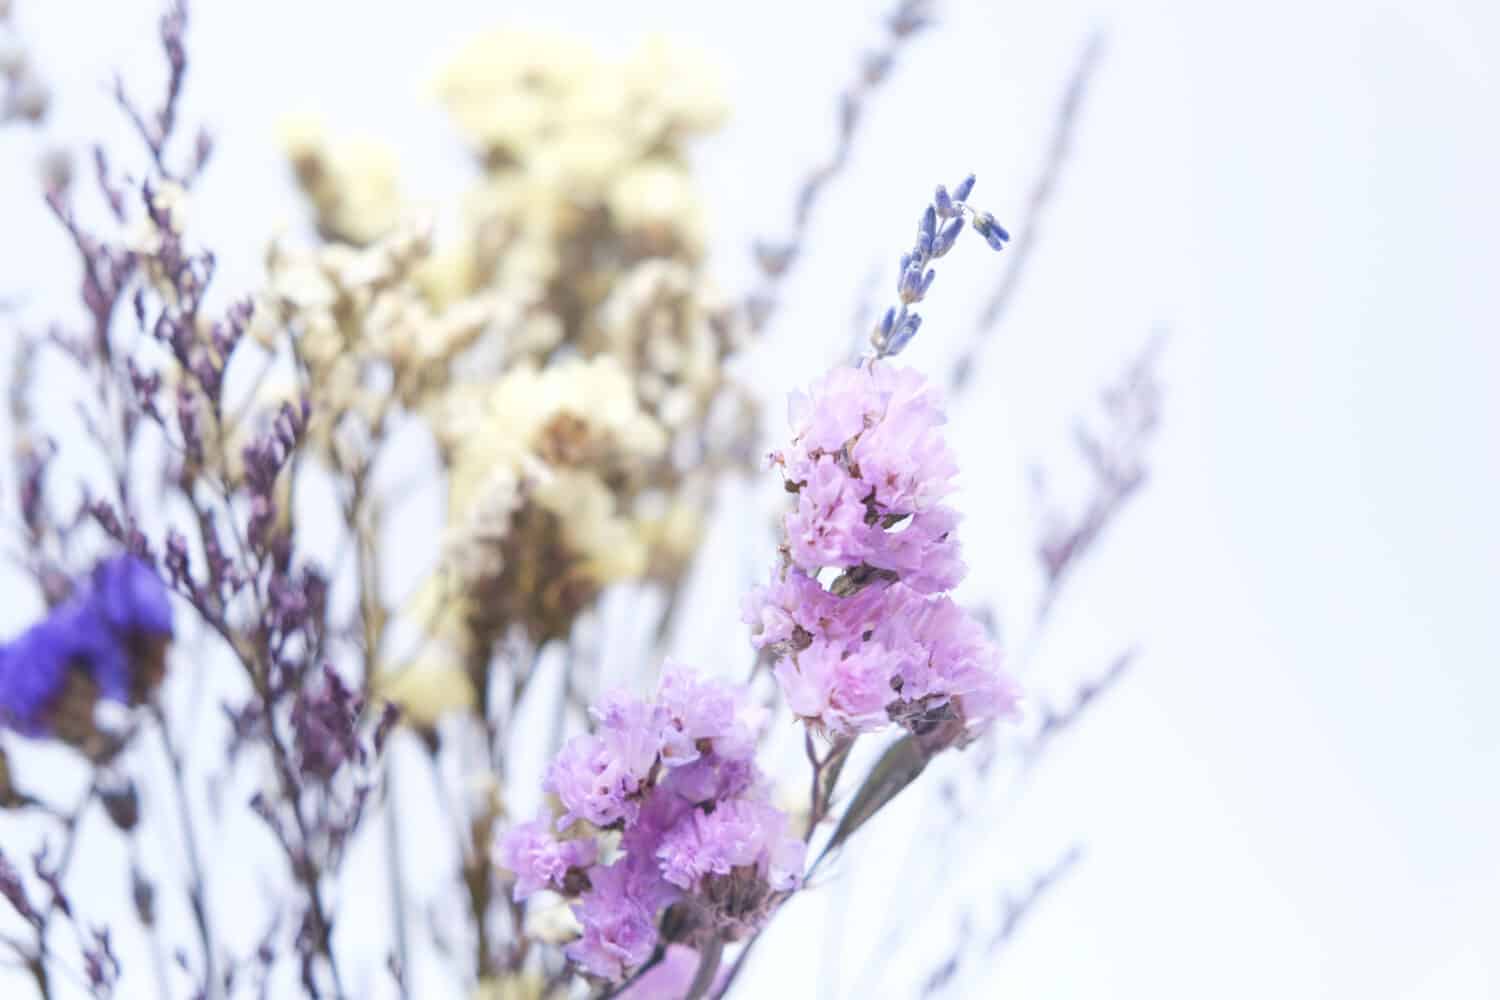 Selective focus on dried flowers, purple dried caspia, statice, lavender on the white background.